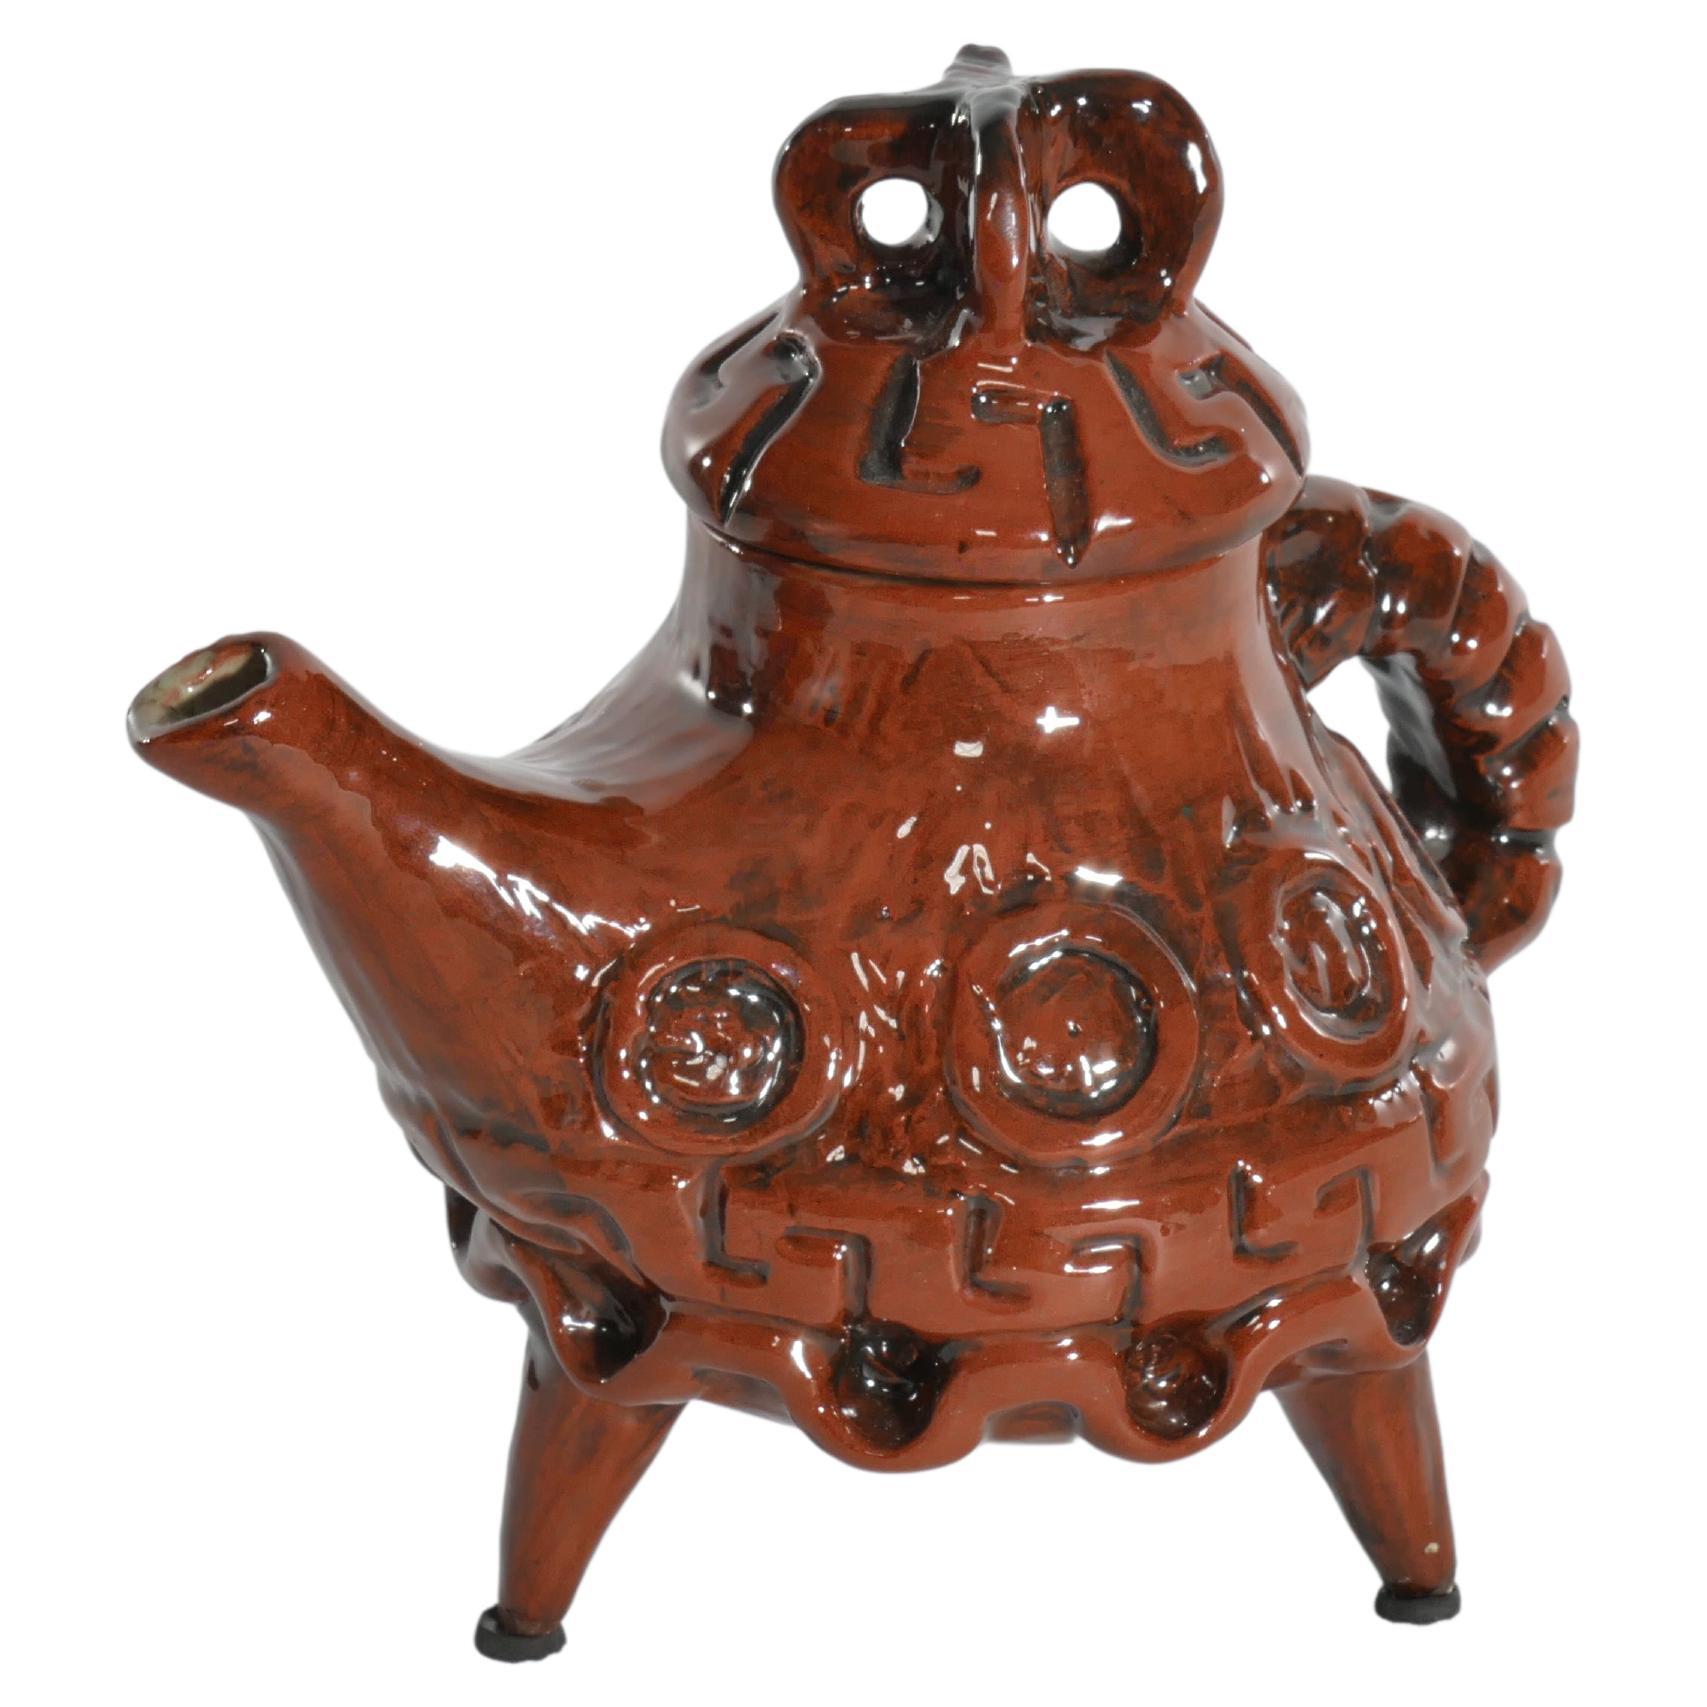 Vintage Playful Teapot with Crab-like Features by Allan Hellman Sweden 1982 